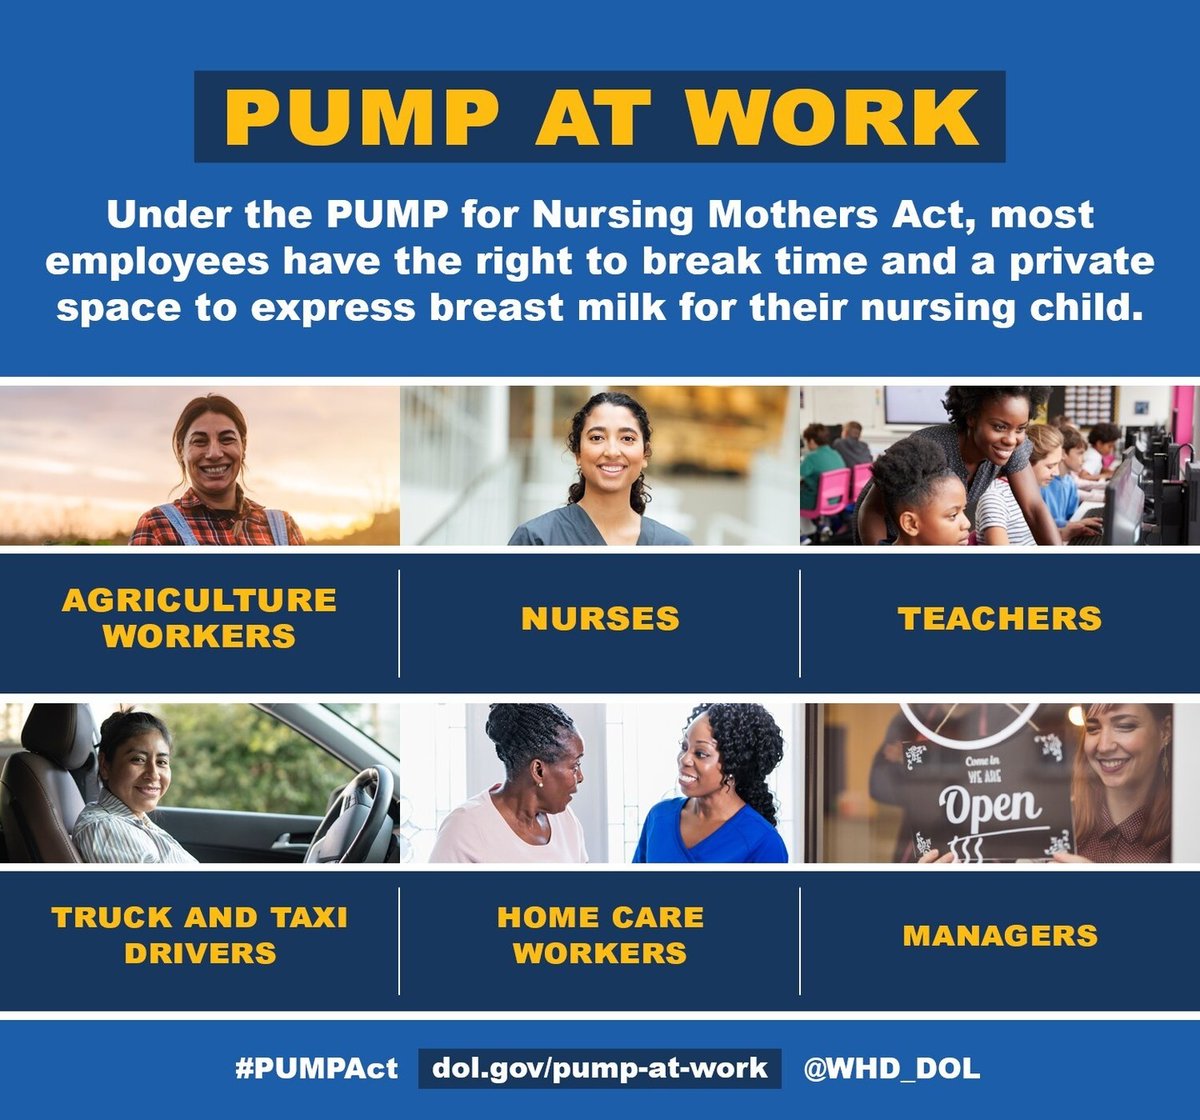 The U.S. Department of Labor is ensuring employees who breastfeed are equipped with the #PowertoPump at work. Visit dol.gov/pump-at-work to download key resources and learn more about your rights! 

#PowerToPump #NBM23 #NationalBreastfeedingMonth